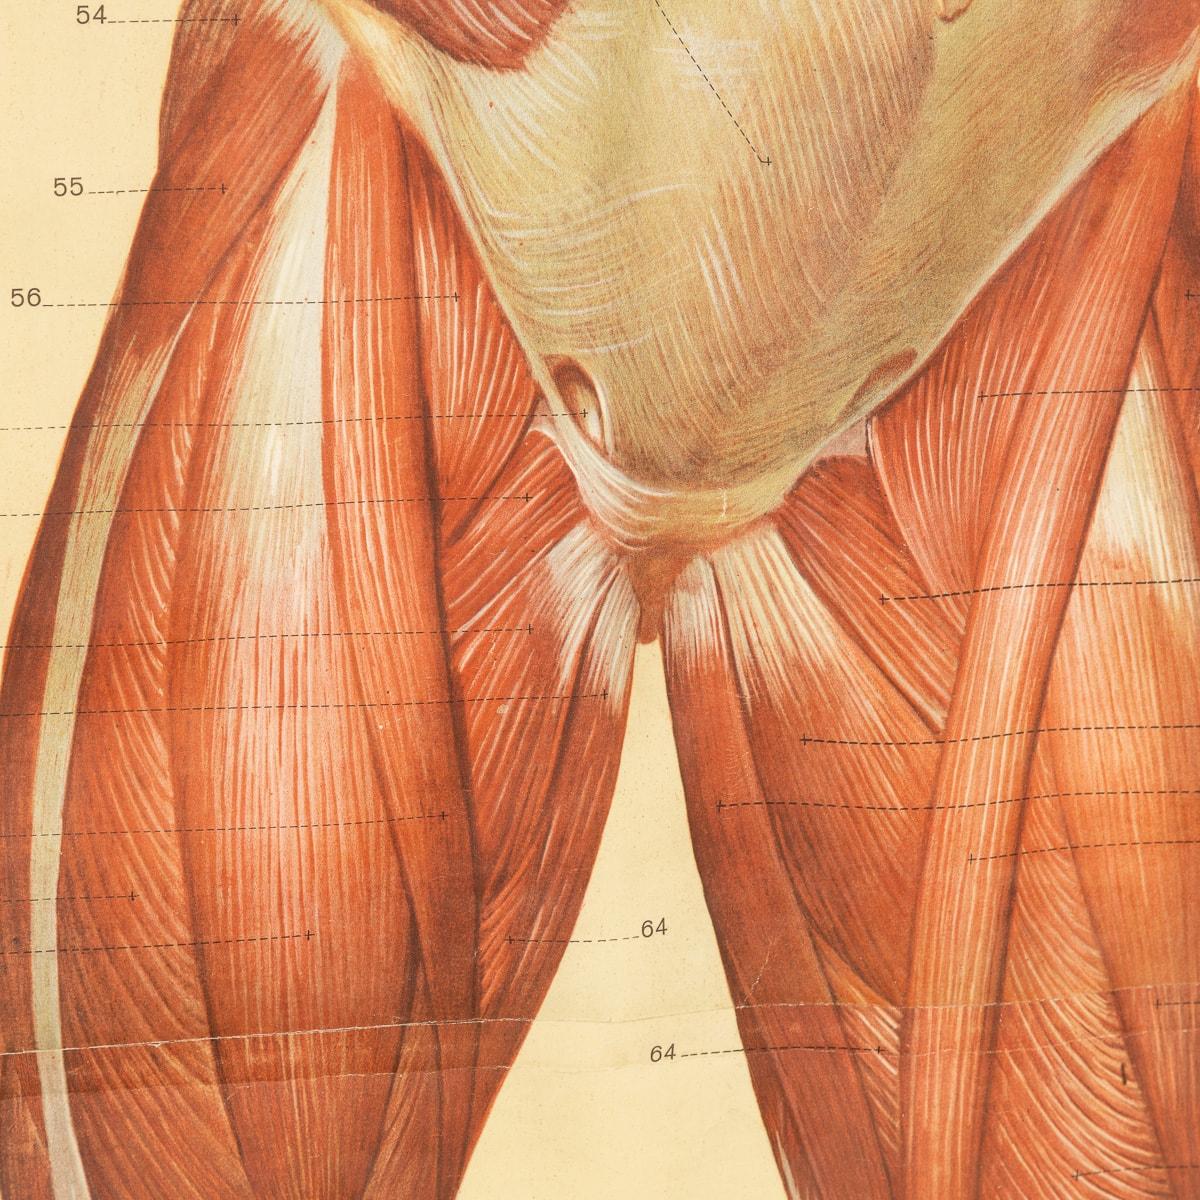 Pair of Anatomical Human Muscular Structure Charts by Tanck & Wagelin For Sale 1